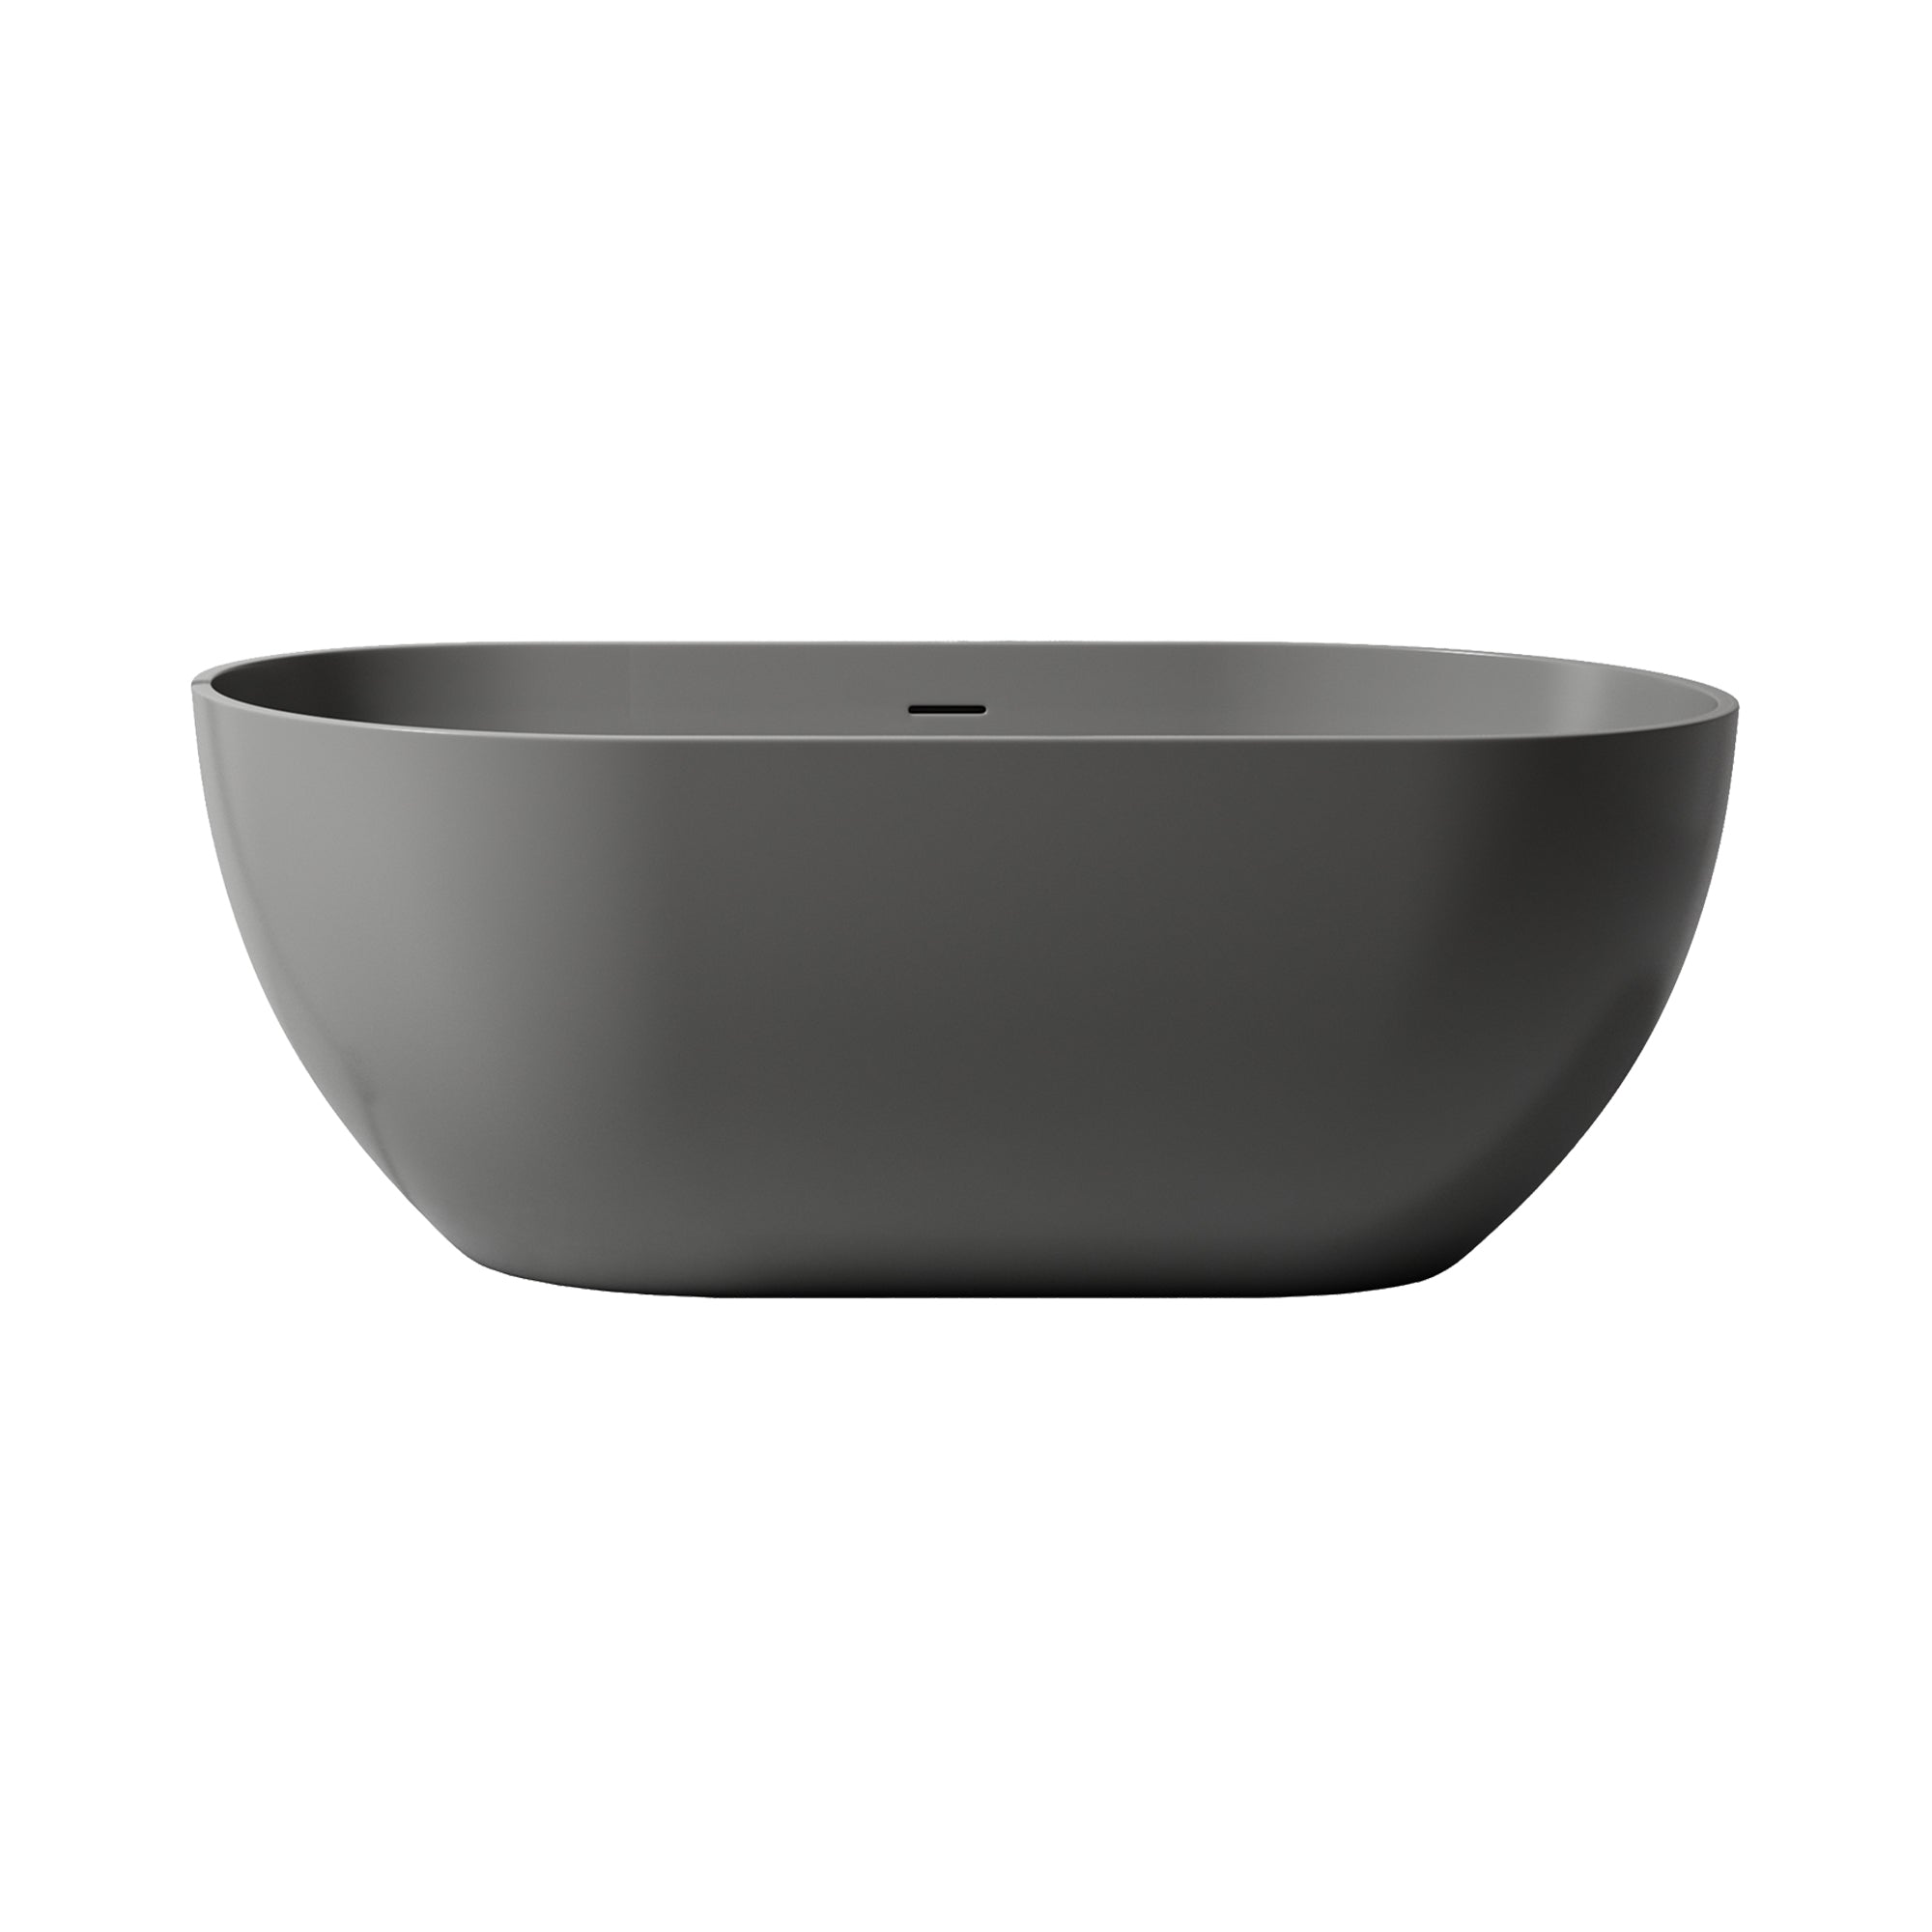 59" Oval Shaped Freestanding Solid Surface Soaking Bathtub with Overflow RX-S05-59DG